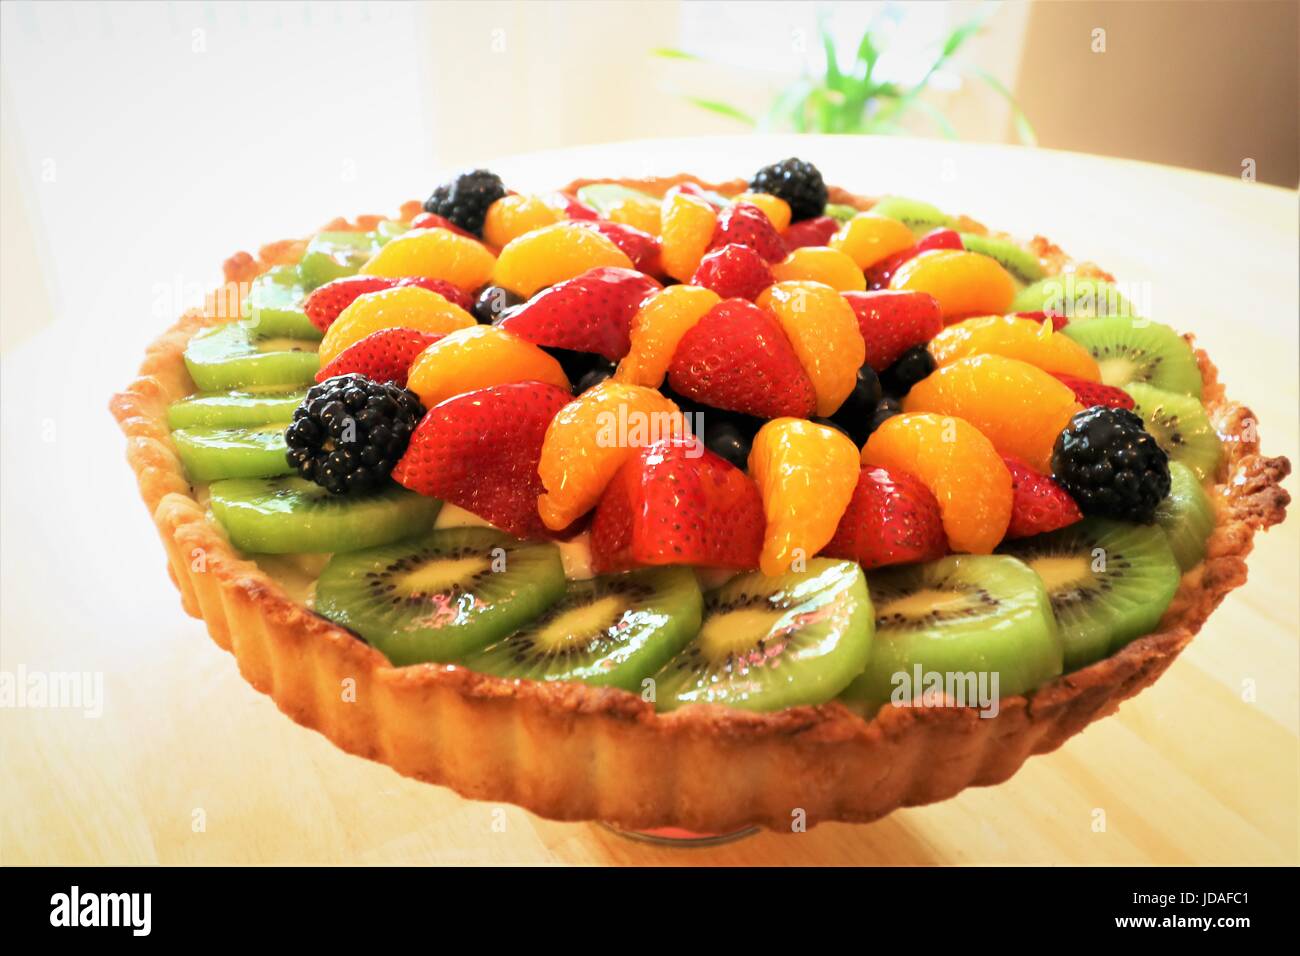 fresh summer fruit tart with shortbread cookie crust, layered with dark chocolate, Kahlua flavored crème patisserie, and fresh fruit Stock Photo